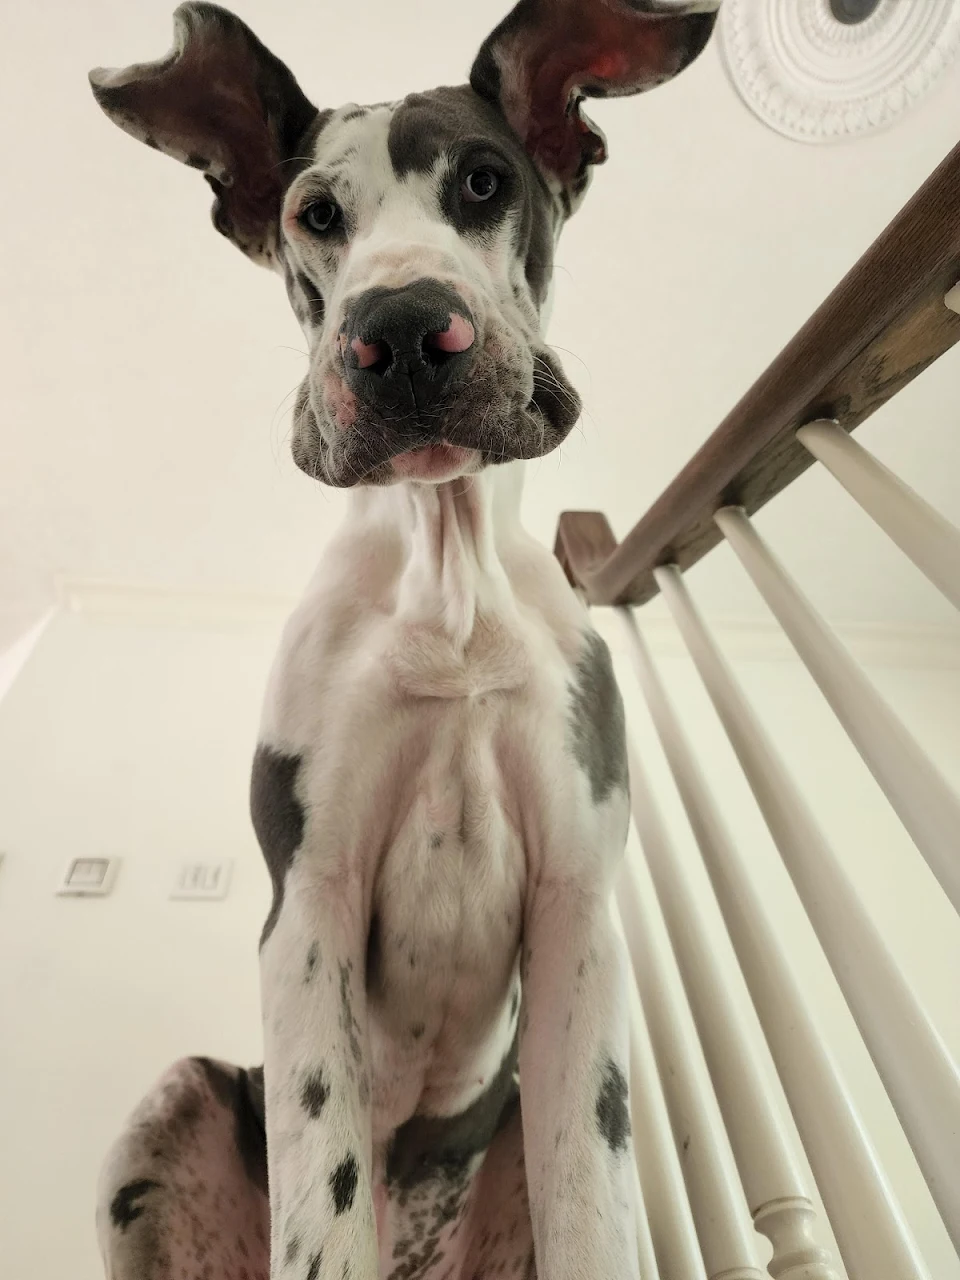 Merlin, the 7 month old Great Dane